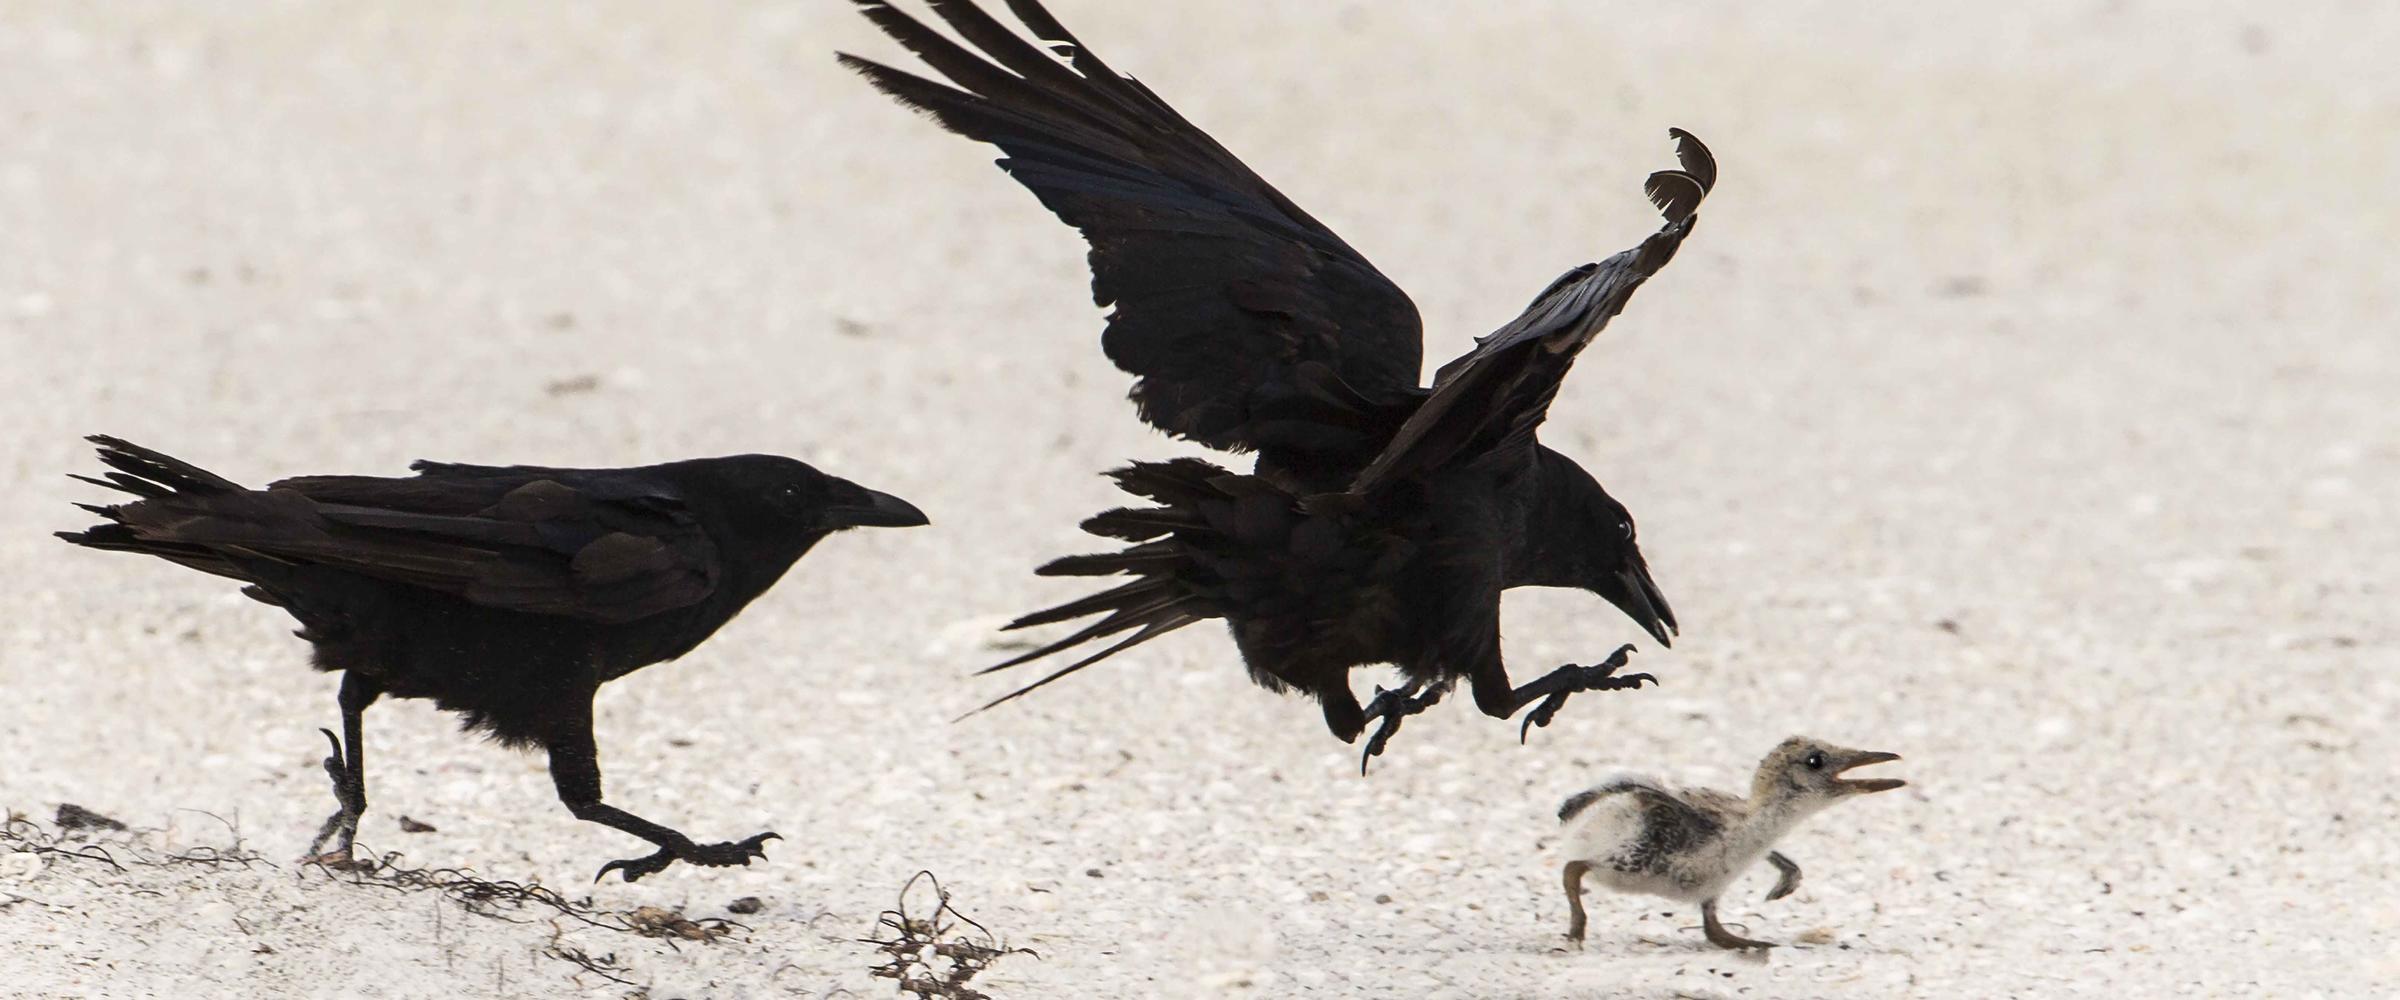 Fish crow preying on chick